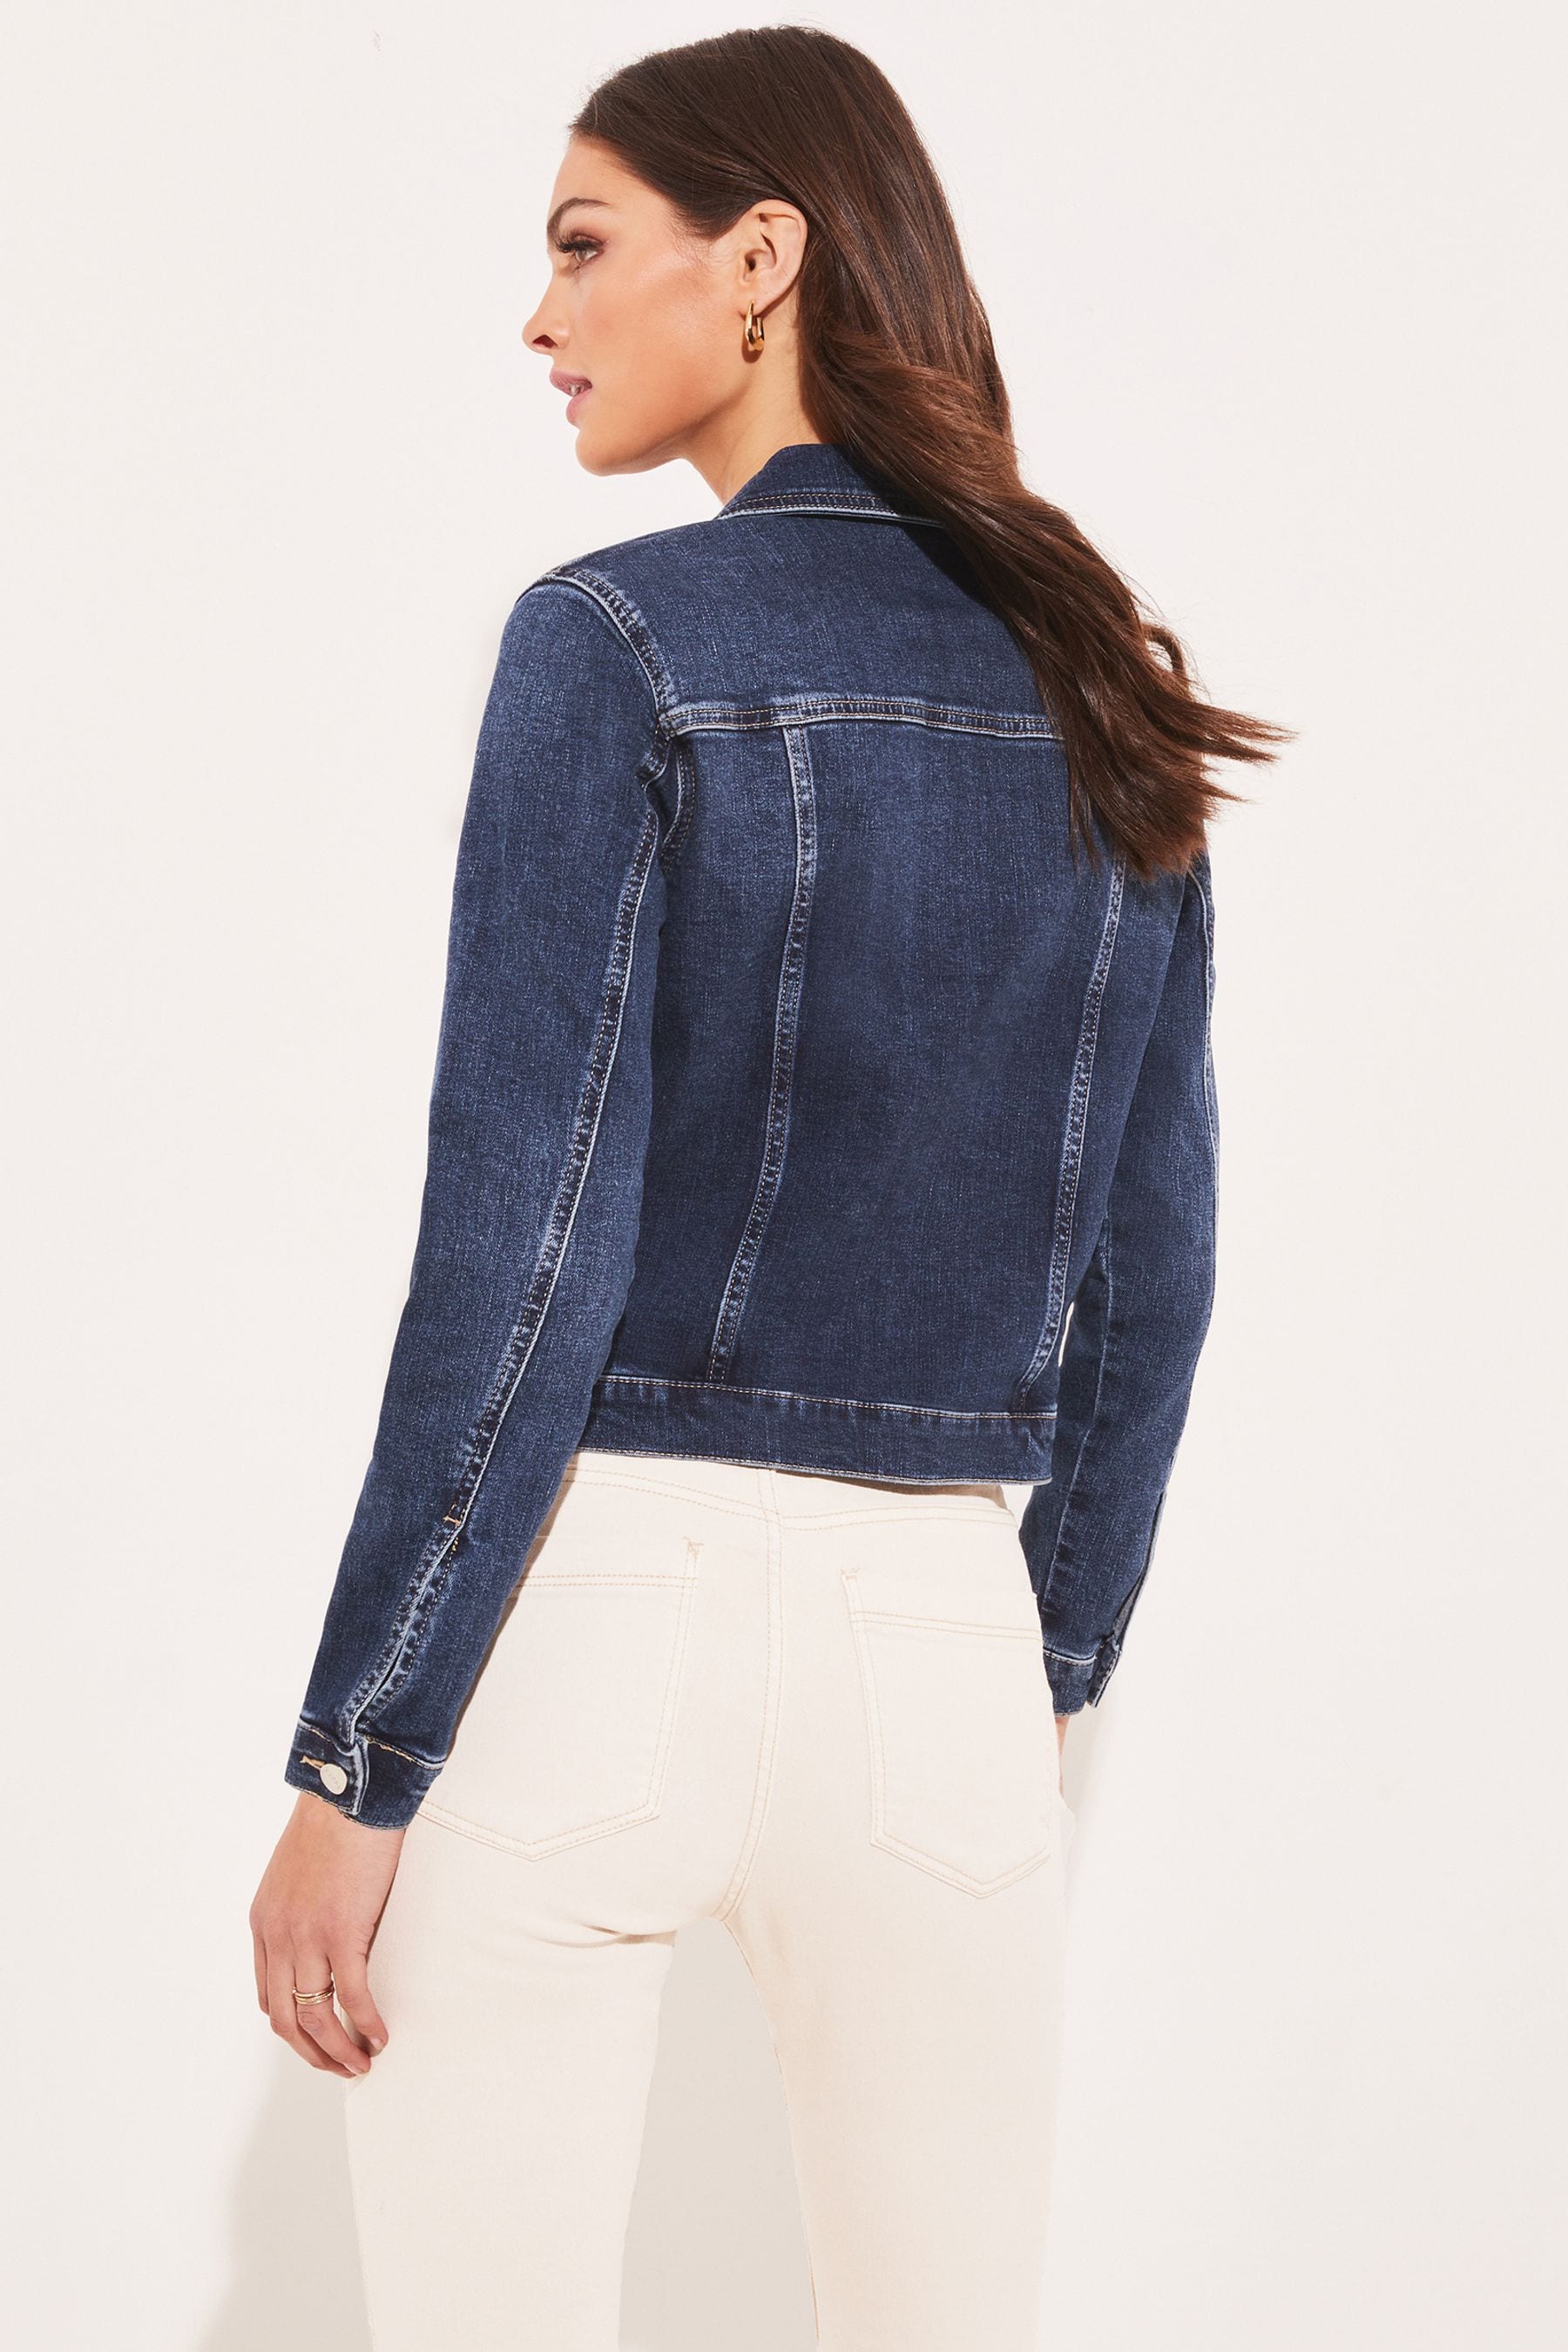 Buy Lipsy Classic Fitted Denim Jacket from Next Egypt